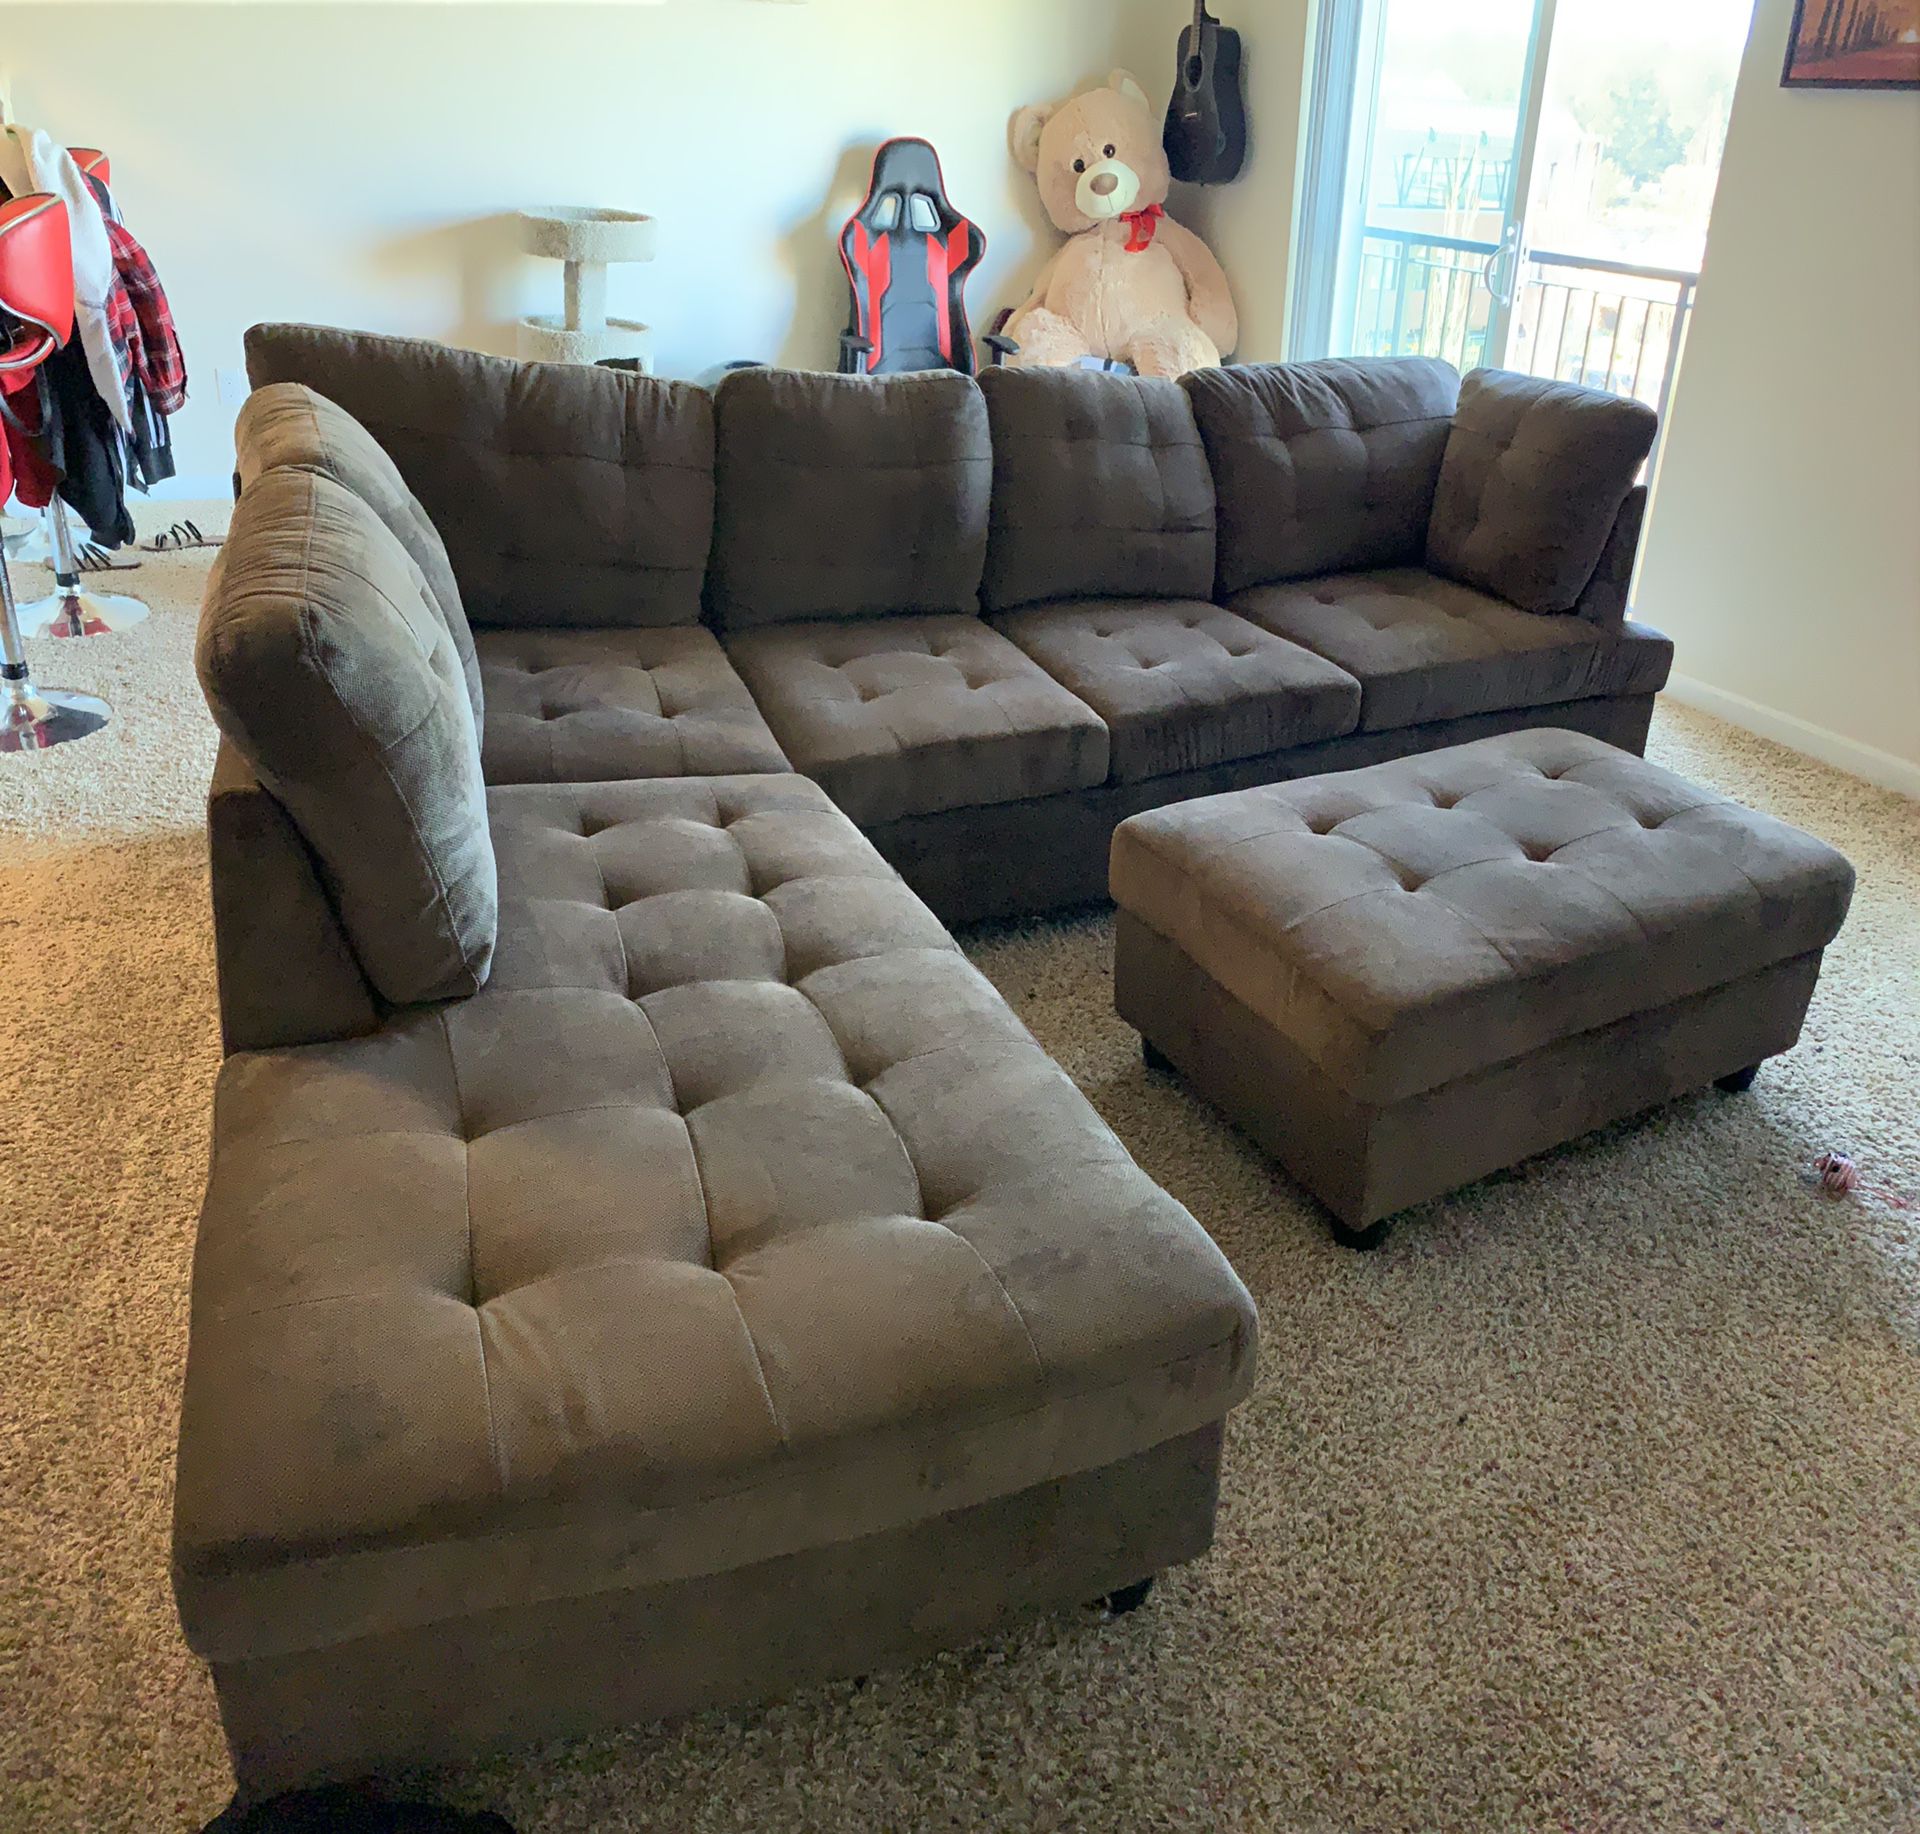 Huge Sectional Couch, 6 months old. 9’x7’